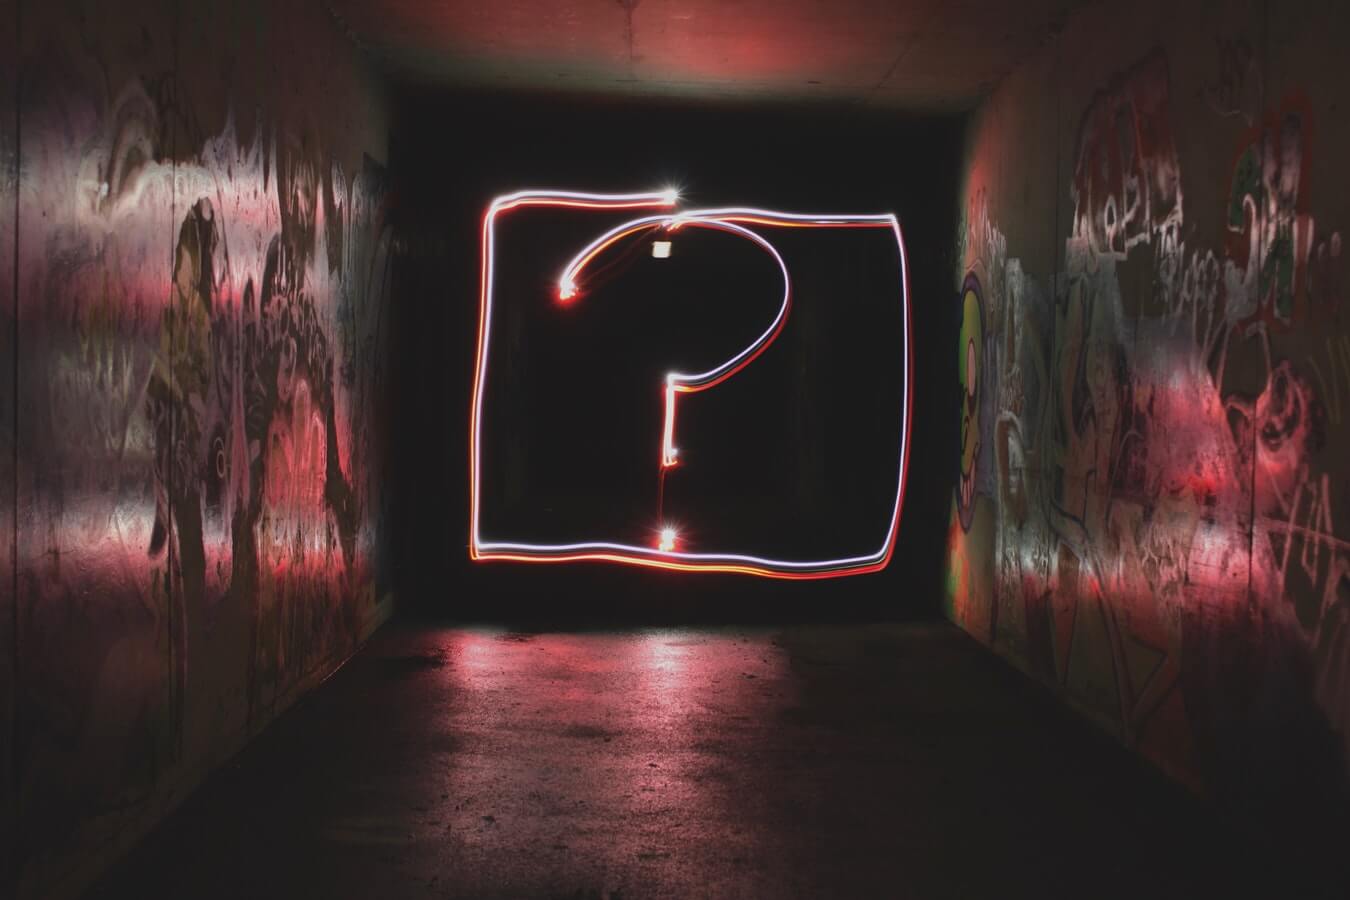 Common myths about cam girls - question mark neon sign